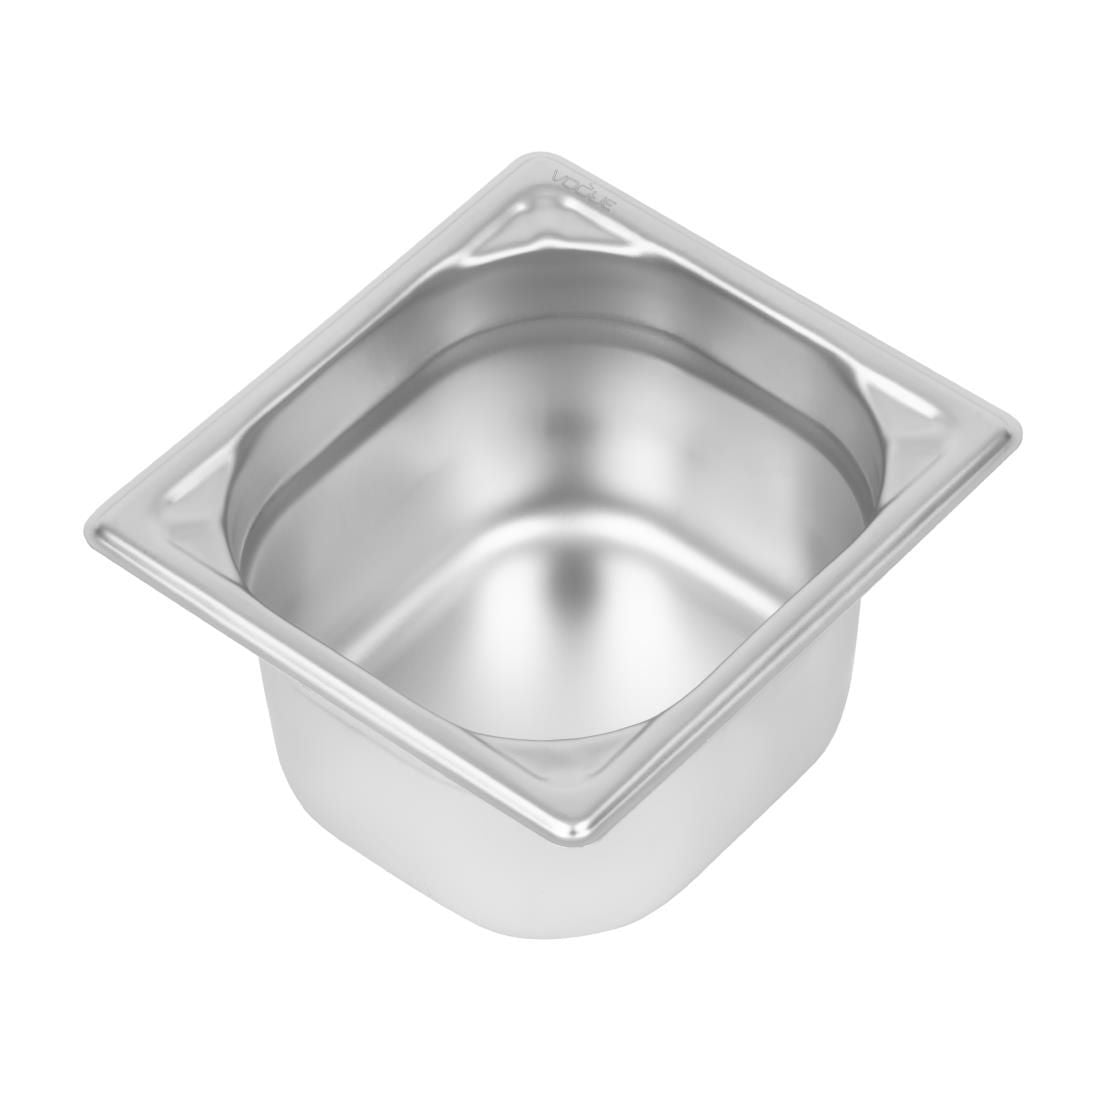 Vogue Heavy Duty Stainless Steel 1/6 Gastronorm Pan 100mm